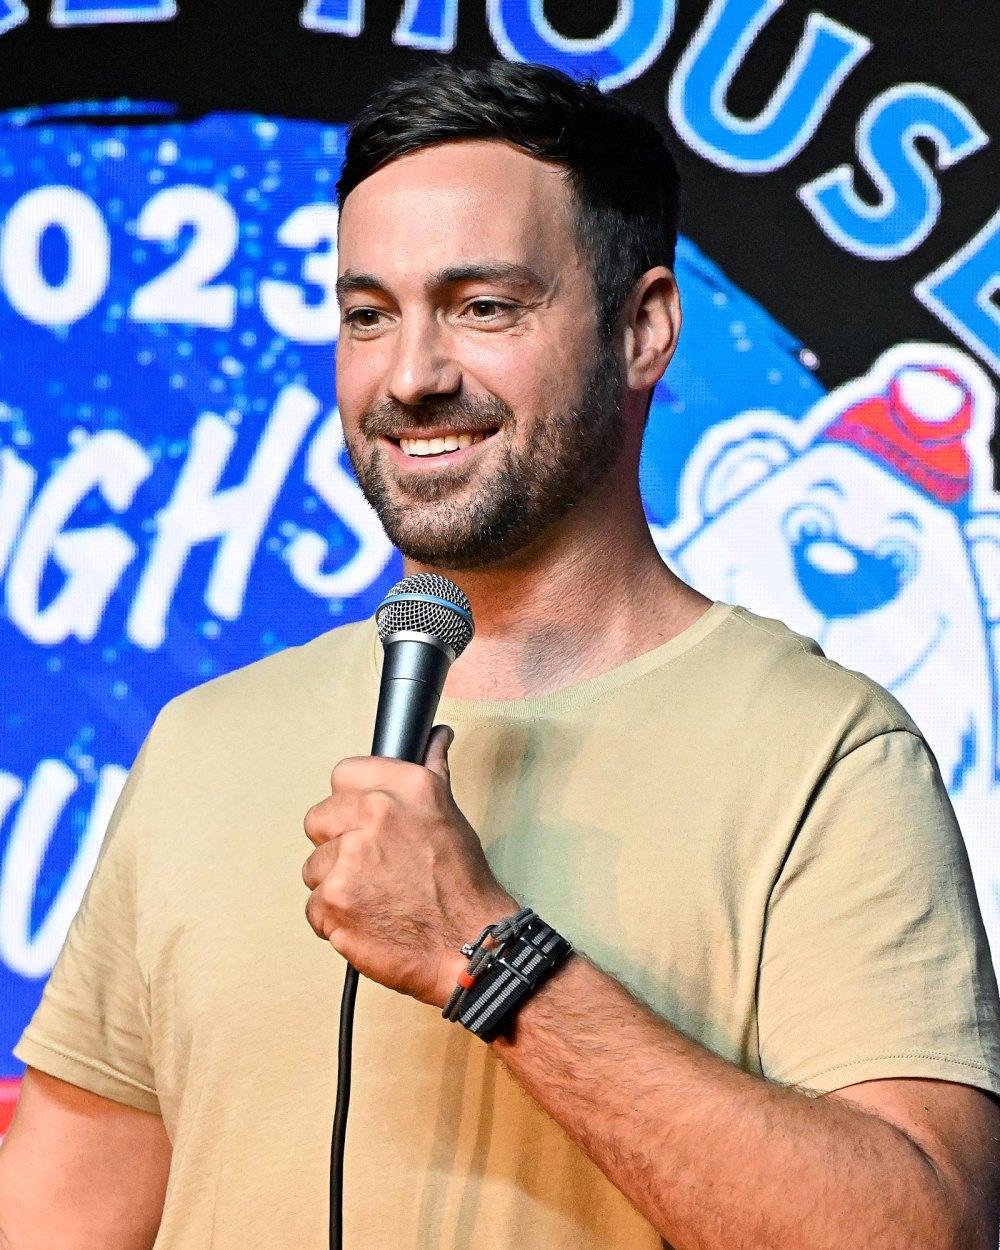 Comedian Jeff Dye Is 36 Days Sober Says He Was a High Functioning Alcoholic 575